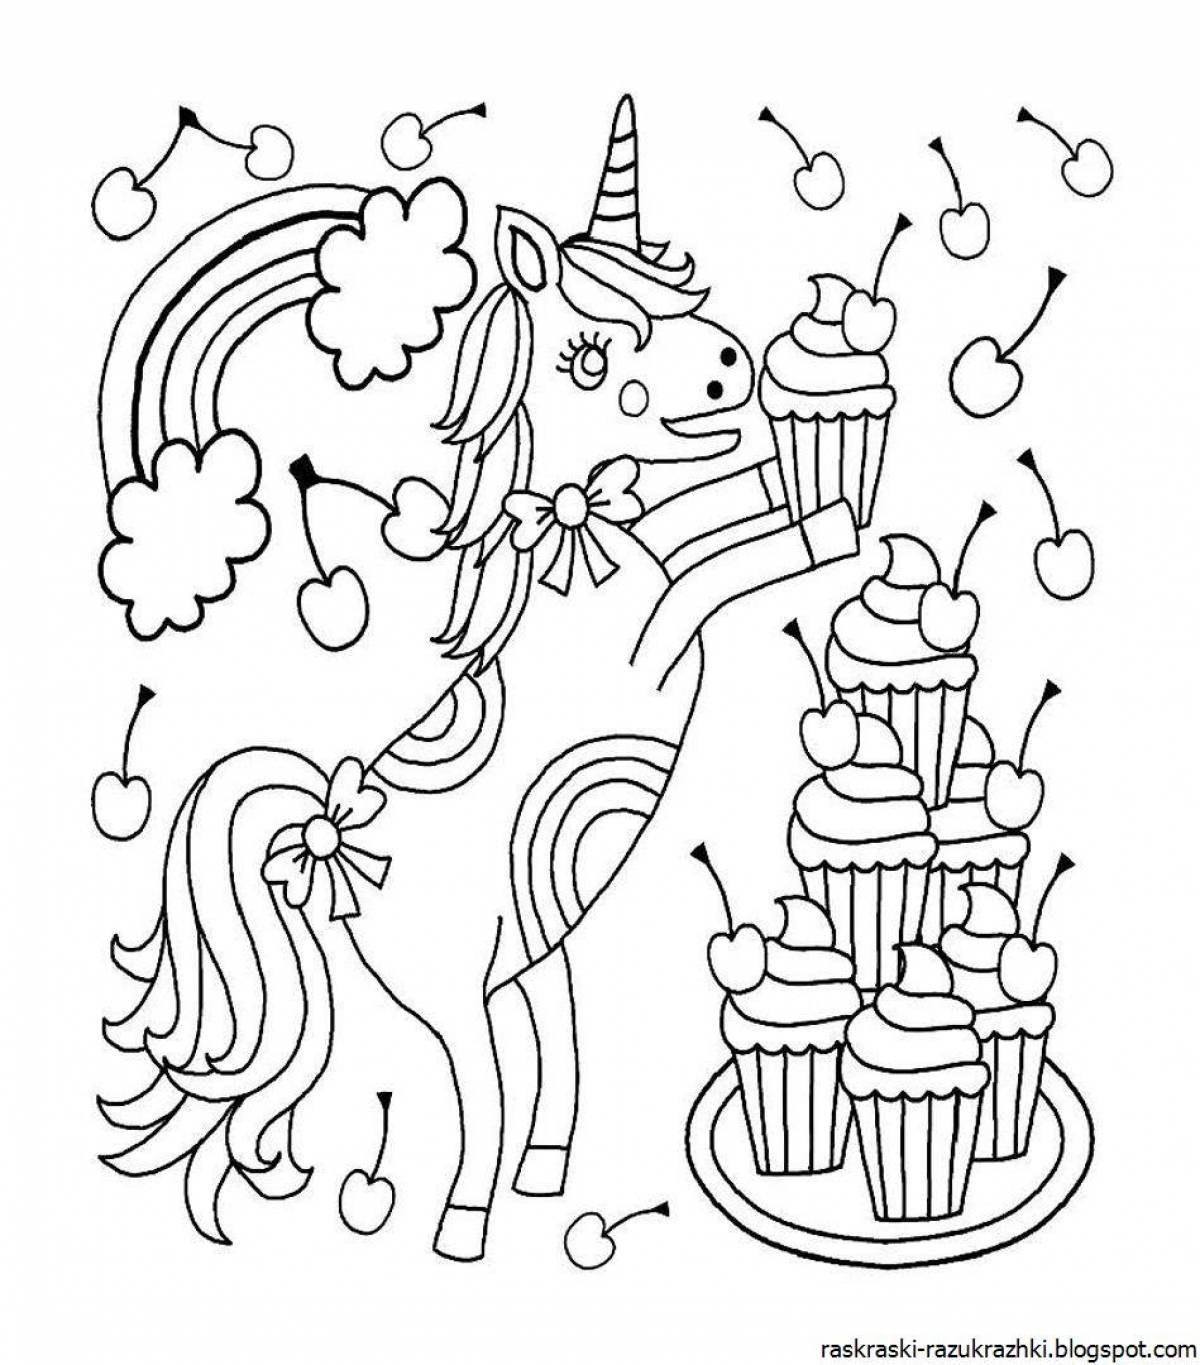 Exotic unicorn coloring book for kids 6-7 years old